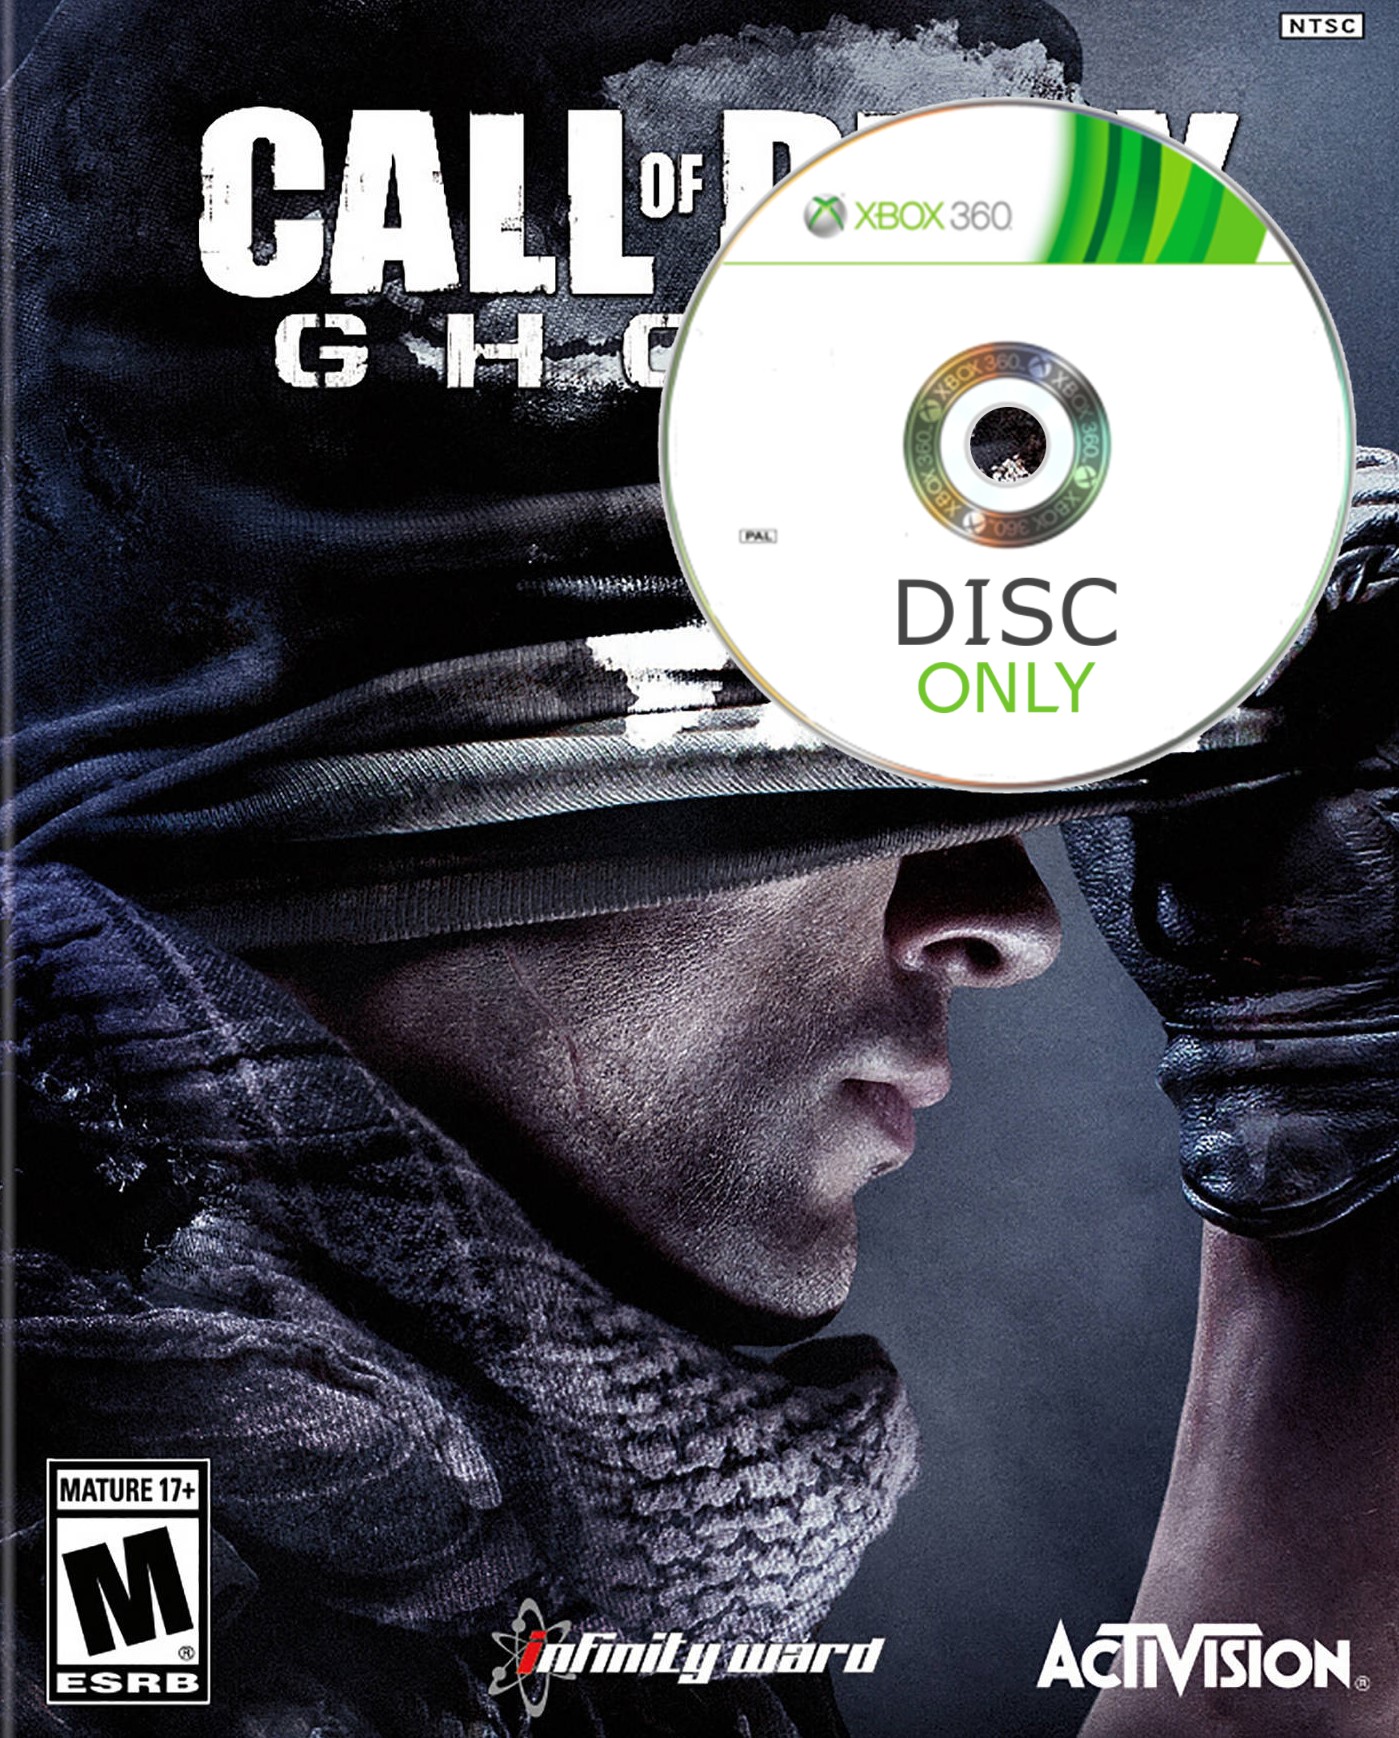 Call of Duty: Ghosts - Disc Only Kopen | Xbox 360 Games